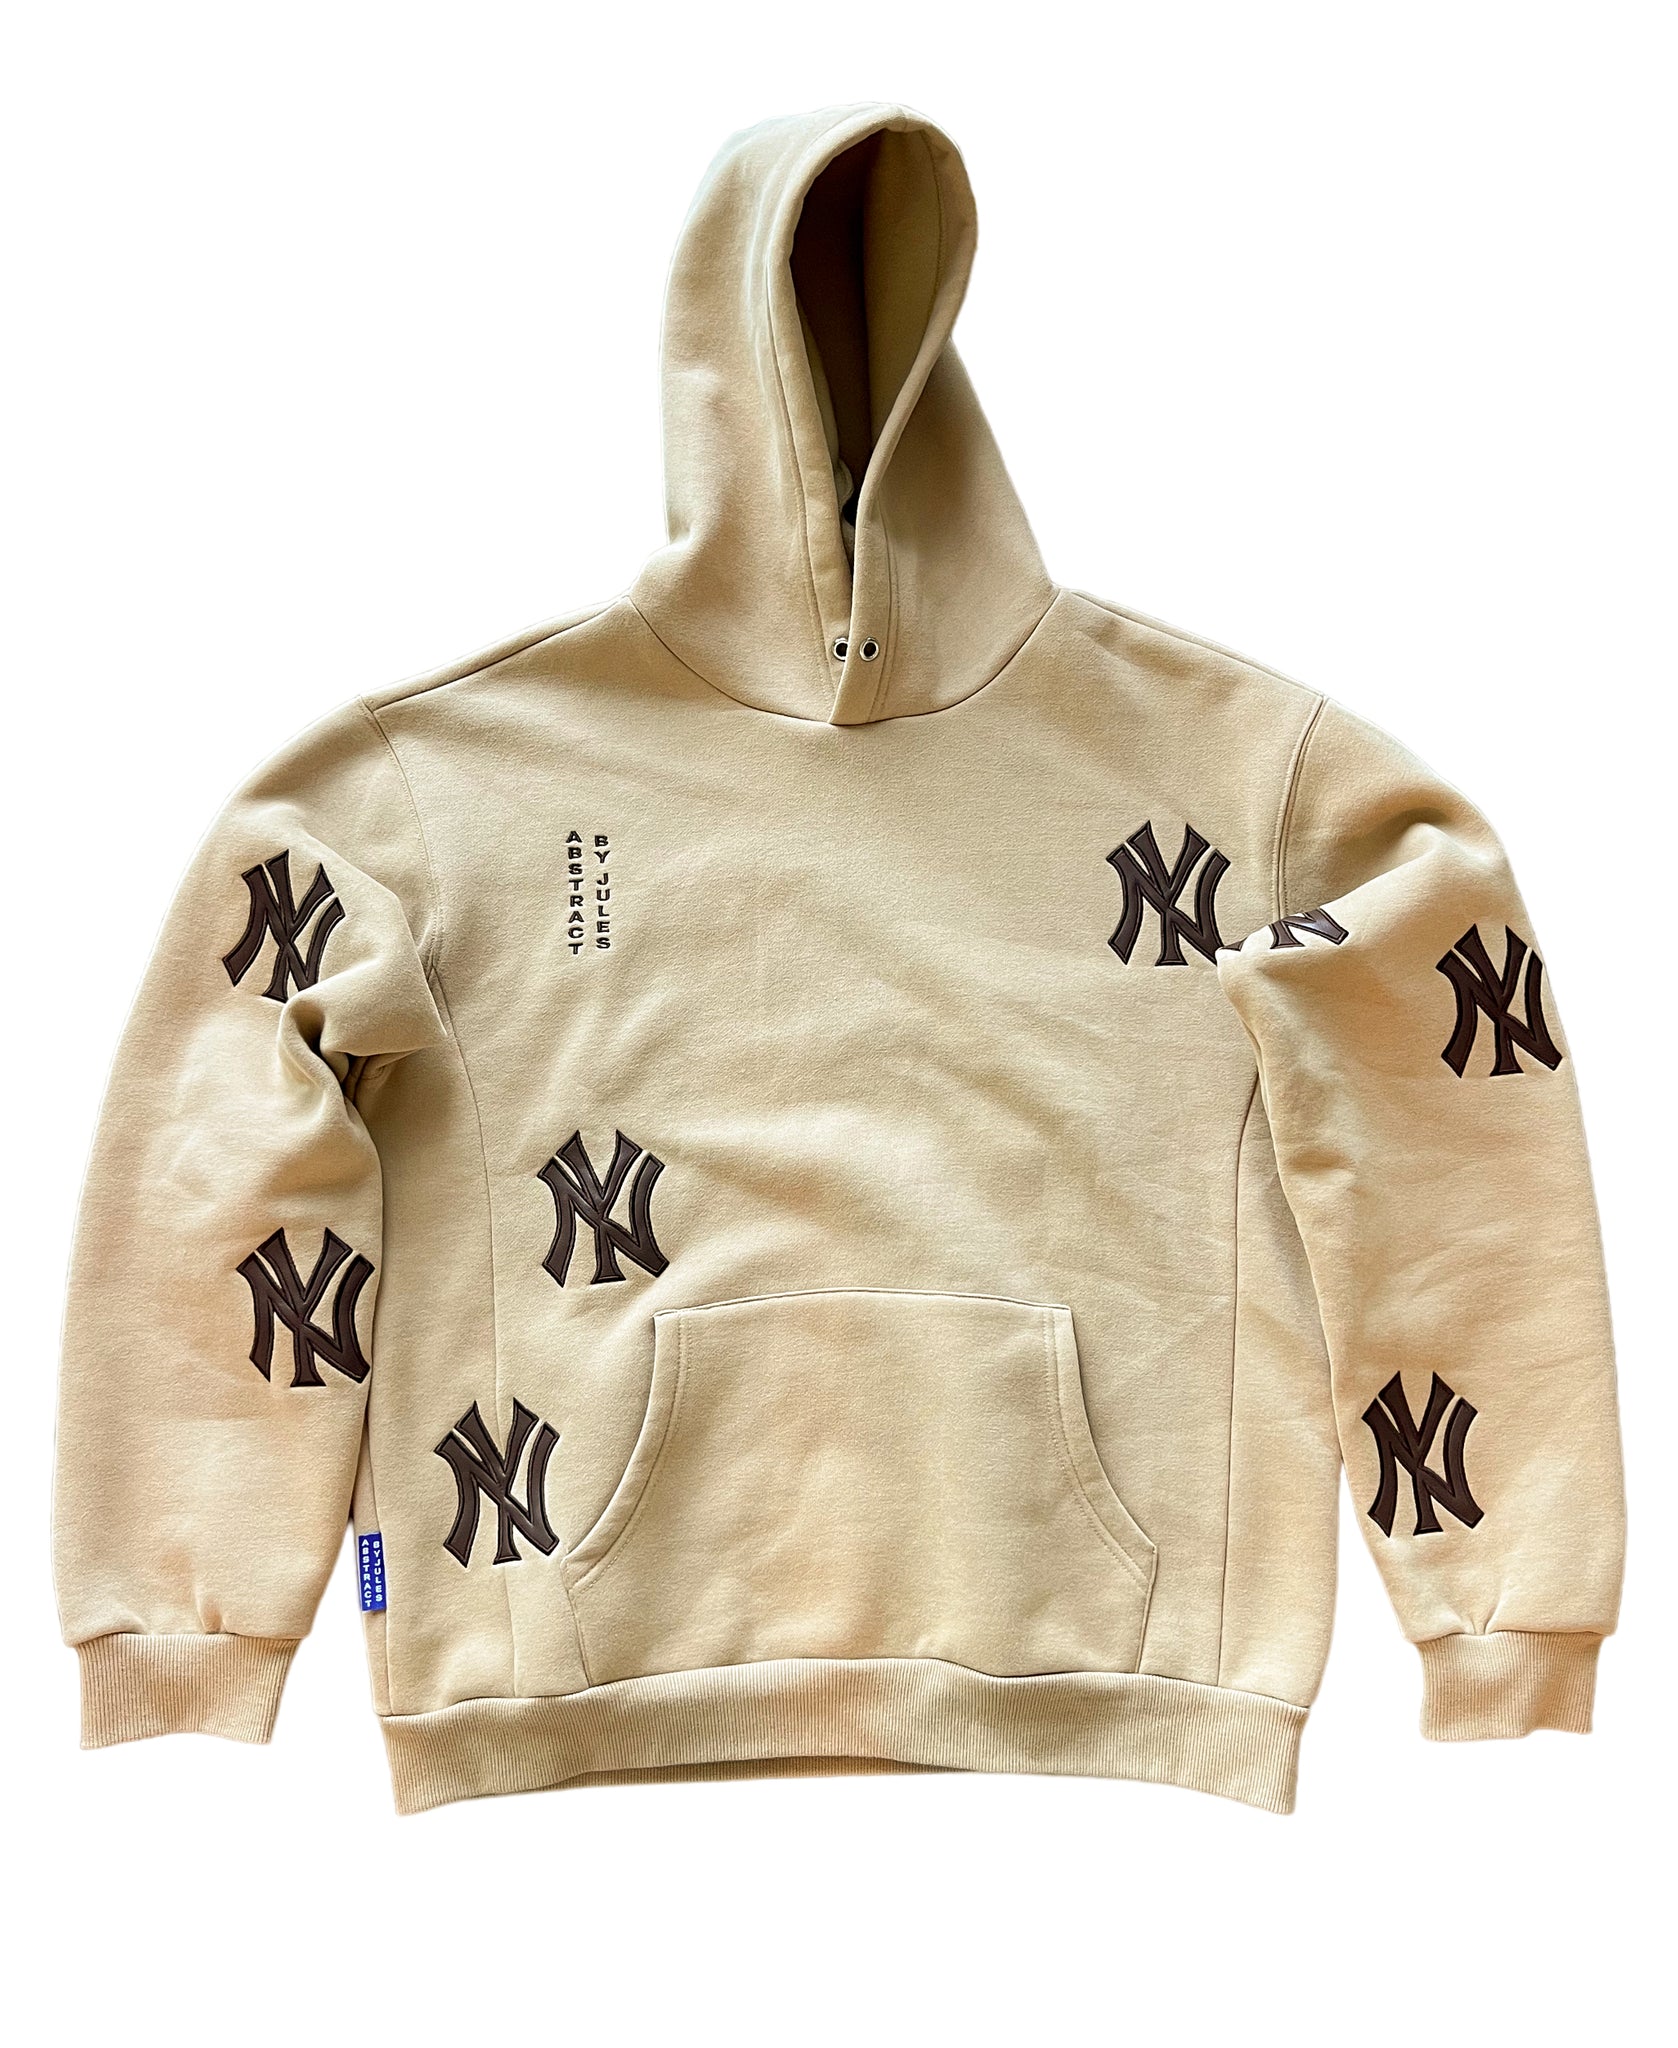 NY Patch Hoodie - Tan